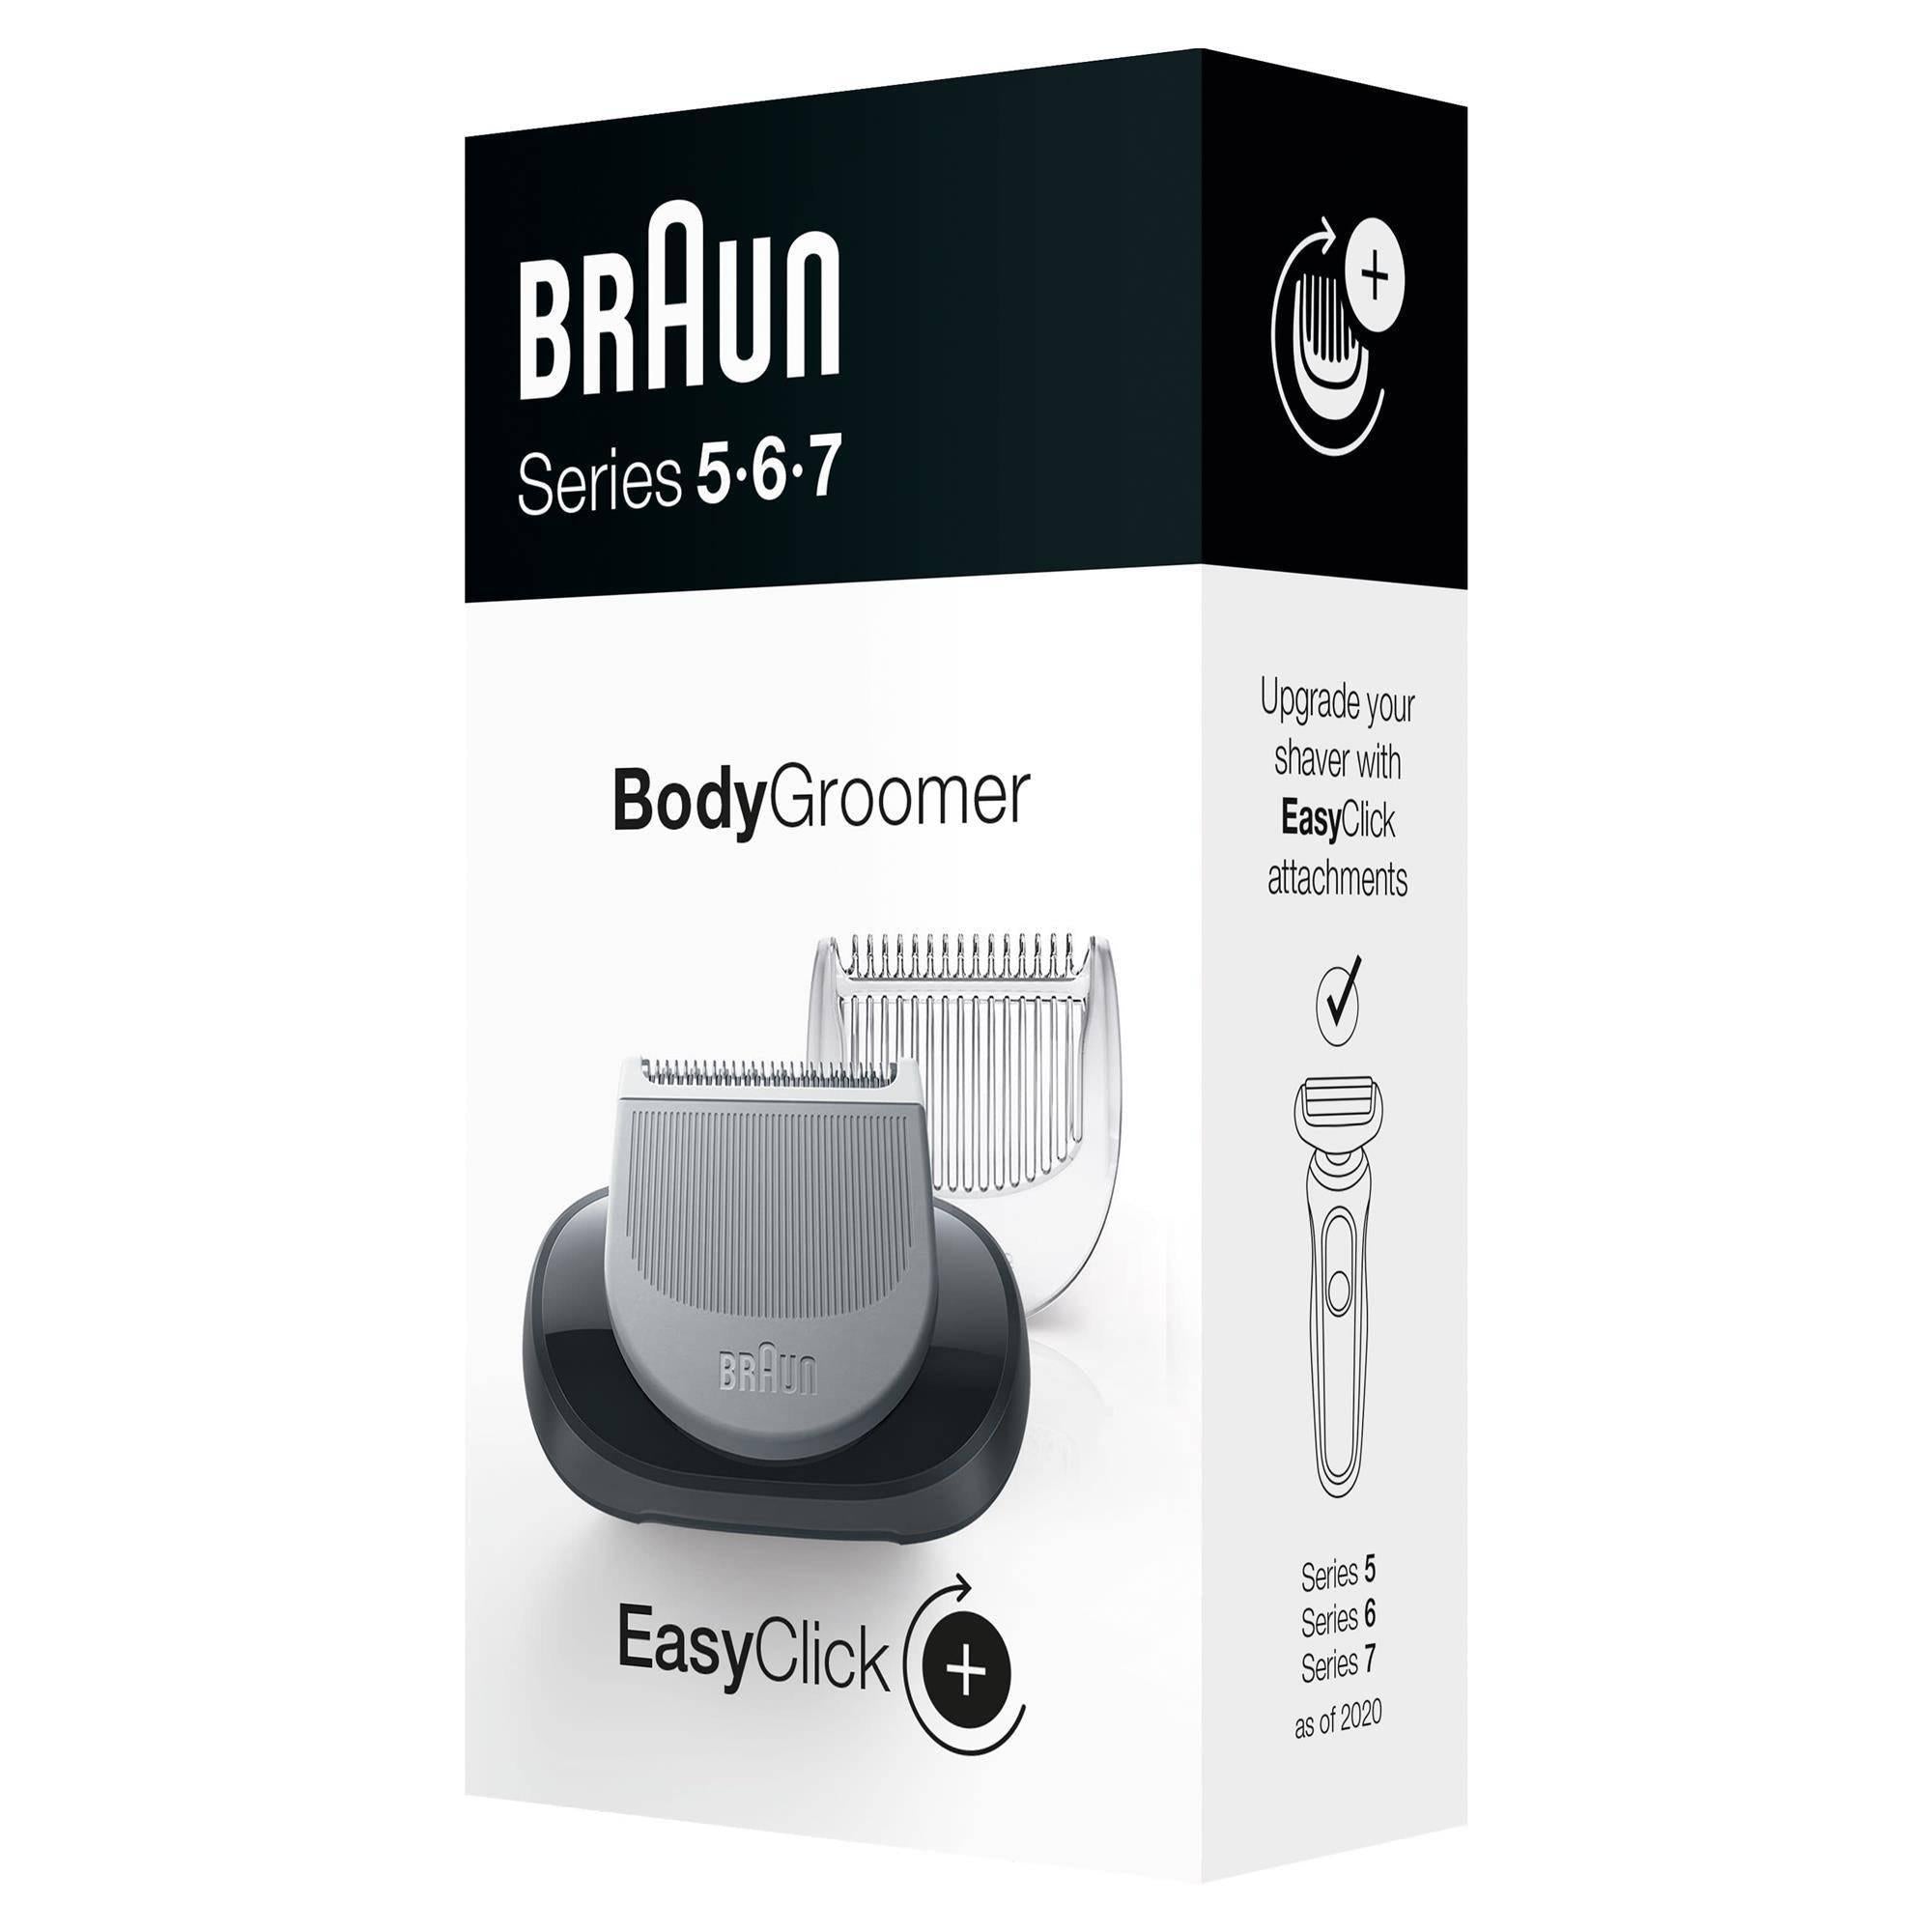 Braun EasyClick Body Groomer Attachment for Braun Series 5, 6, 7 Electric Shaver - 2020 Models Only - Healthxpress.ie